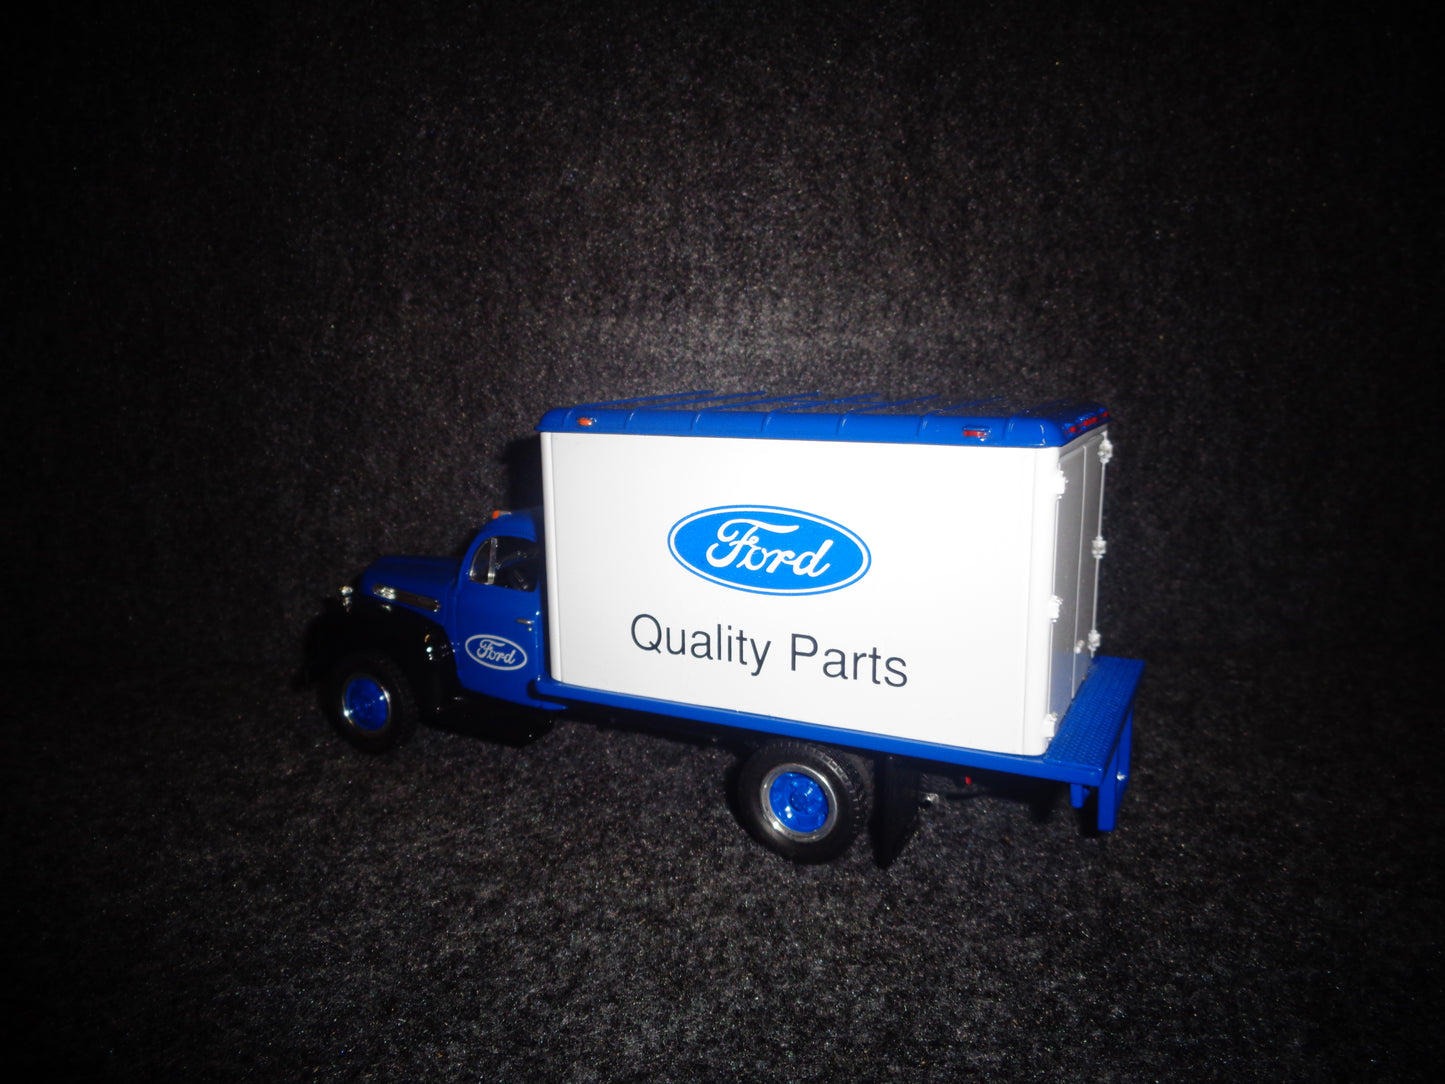 Ford Quality Parts 1951 Ford F-6 Dry Goods Van